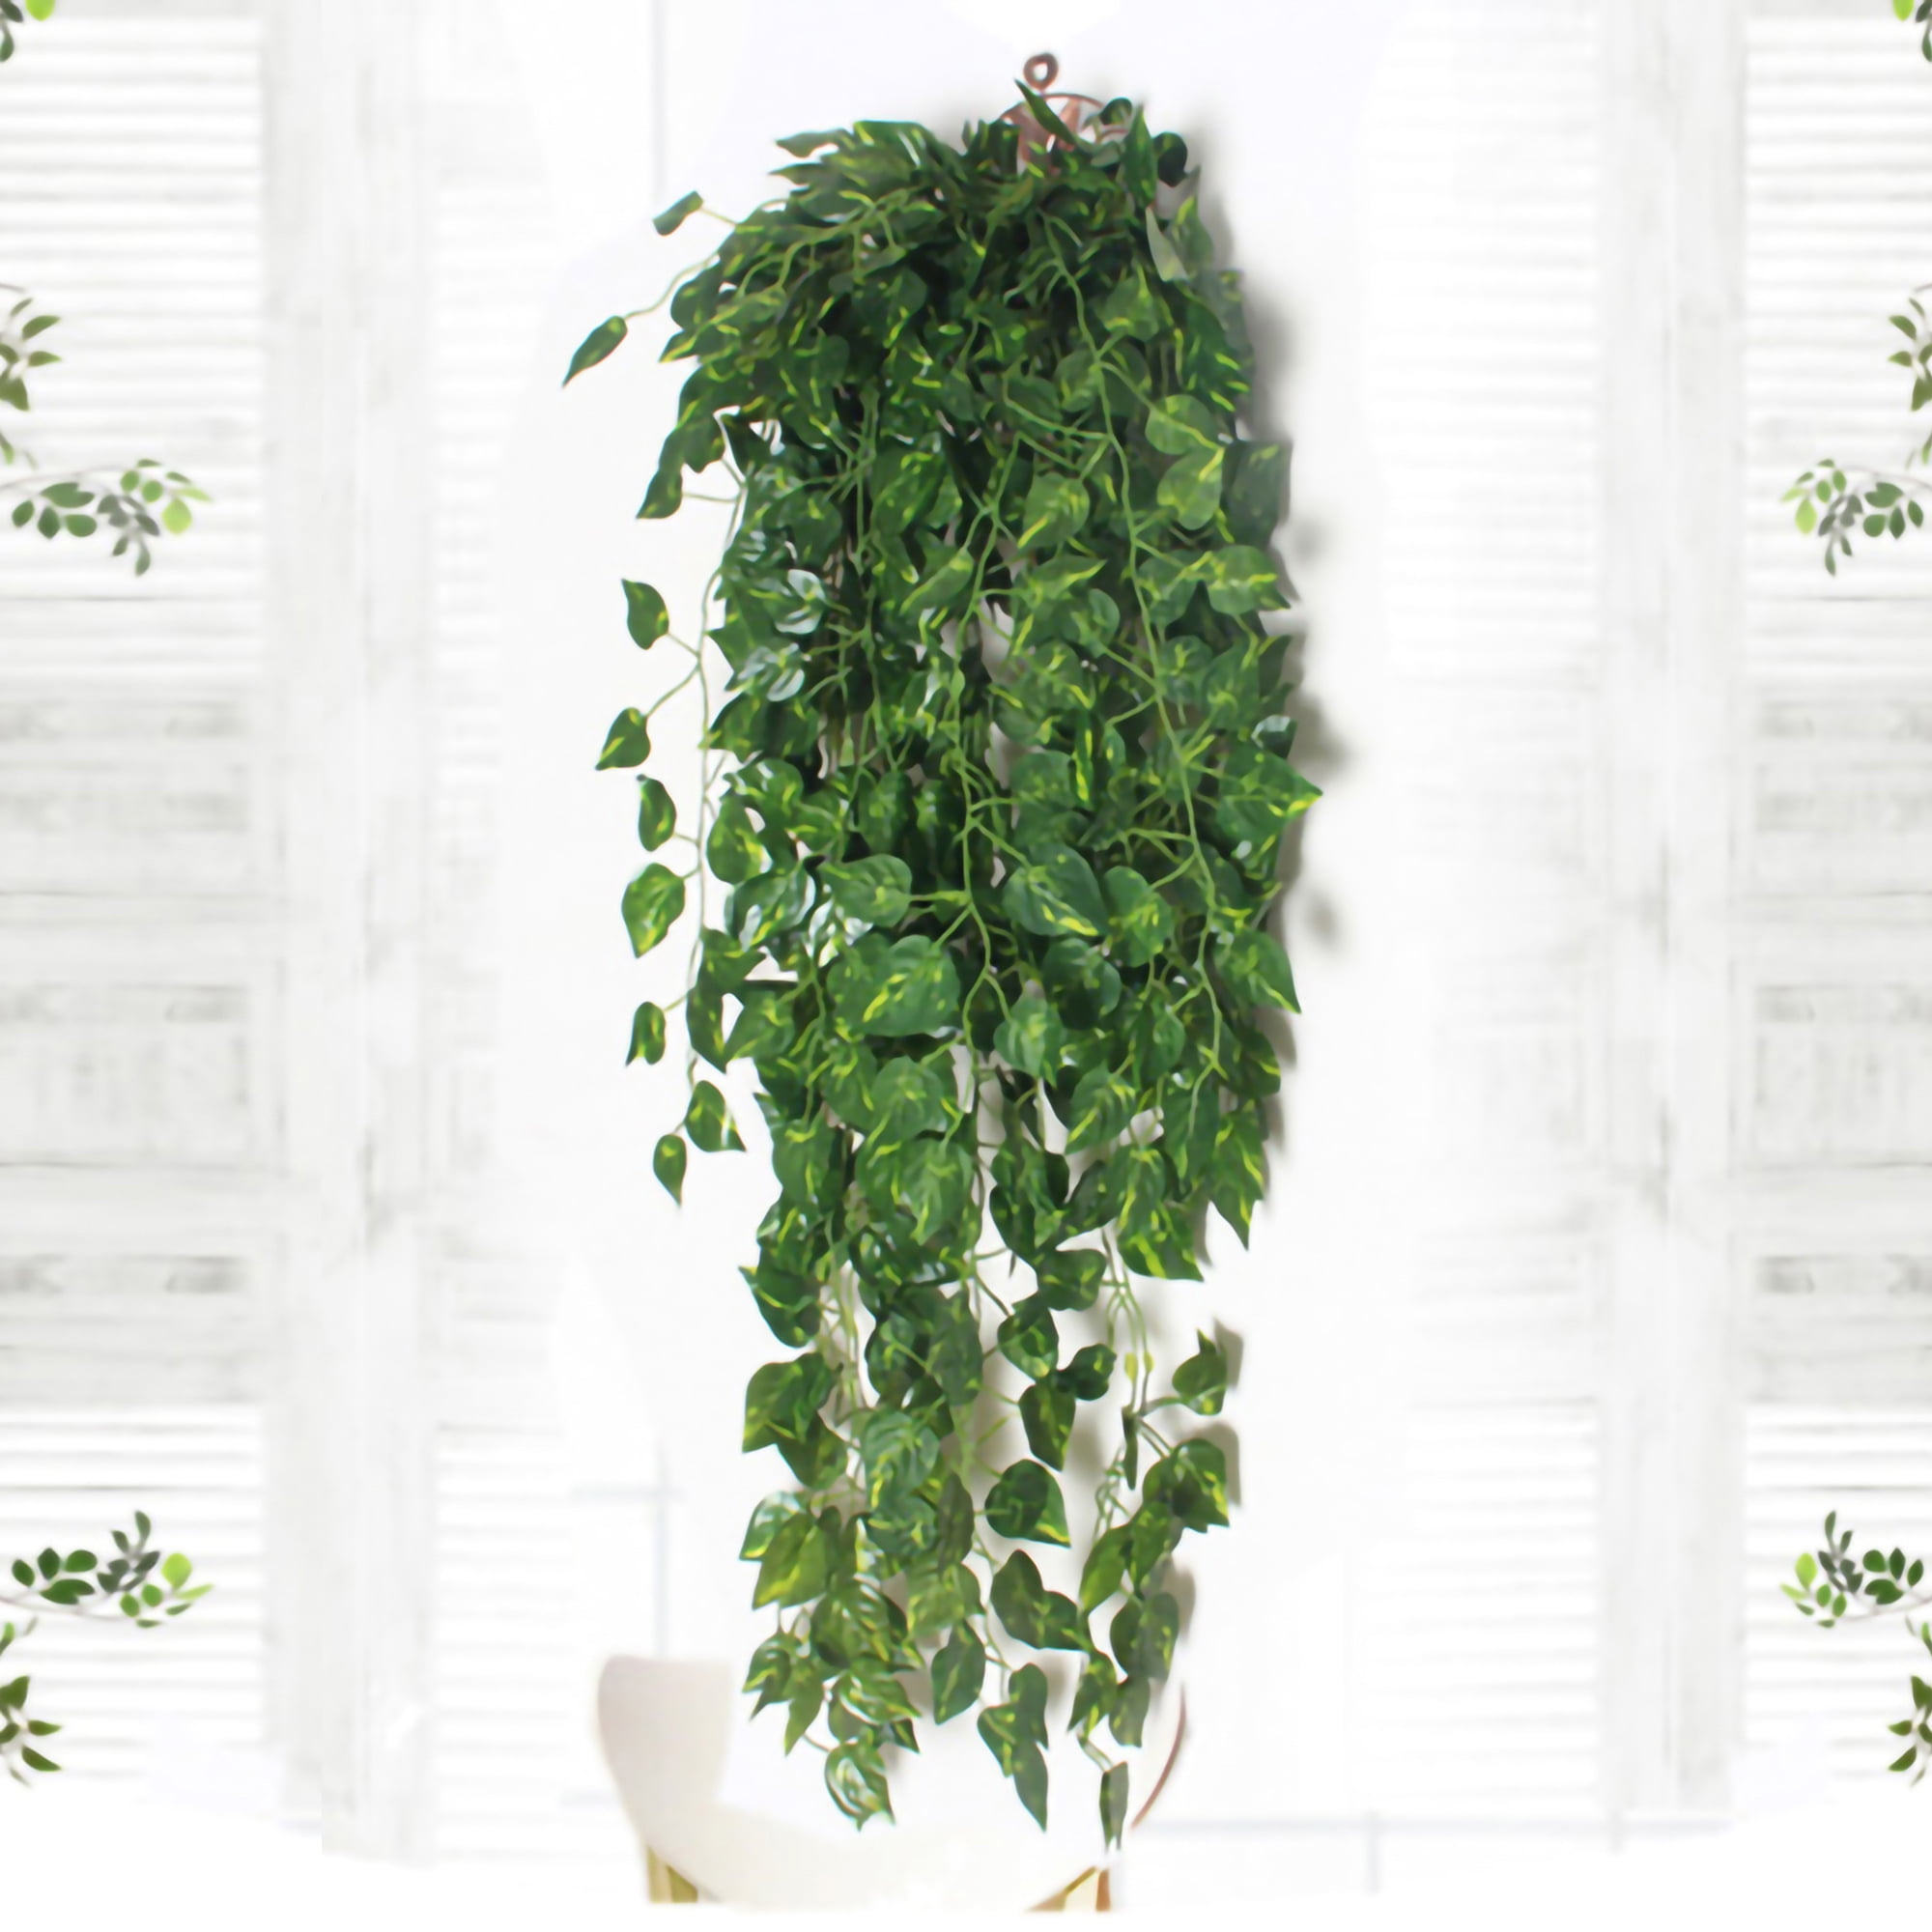 2 Pcs Artificial Hanging Vines Plants Ivy Greenery Faux Plants Wall Home Decor 